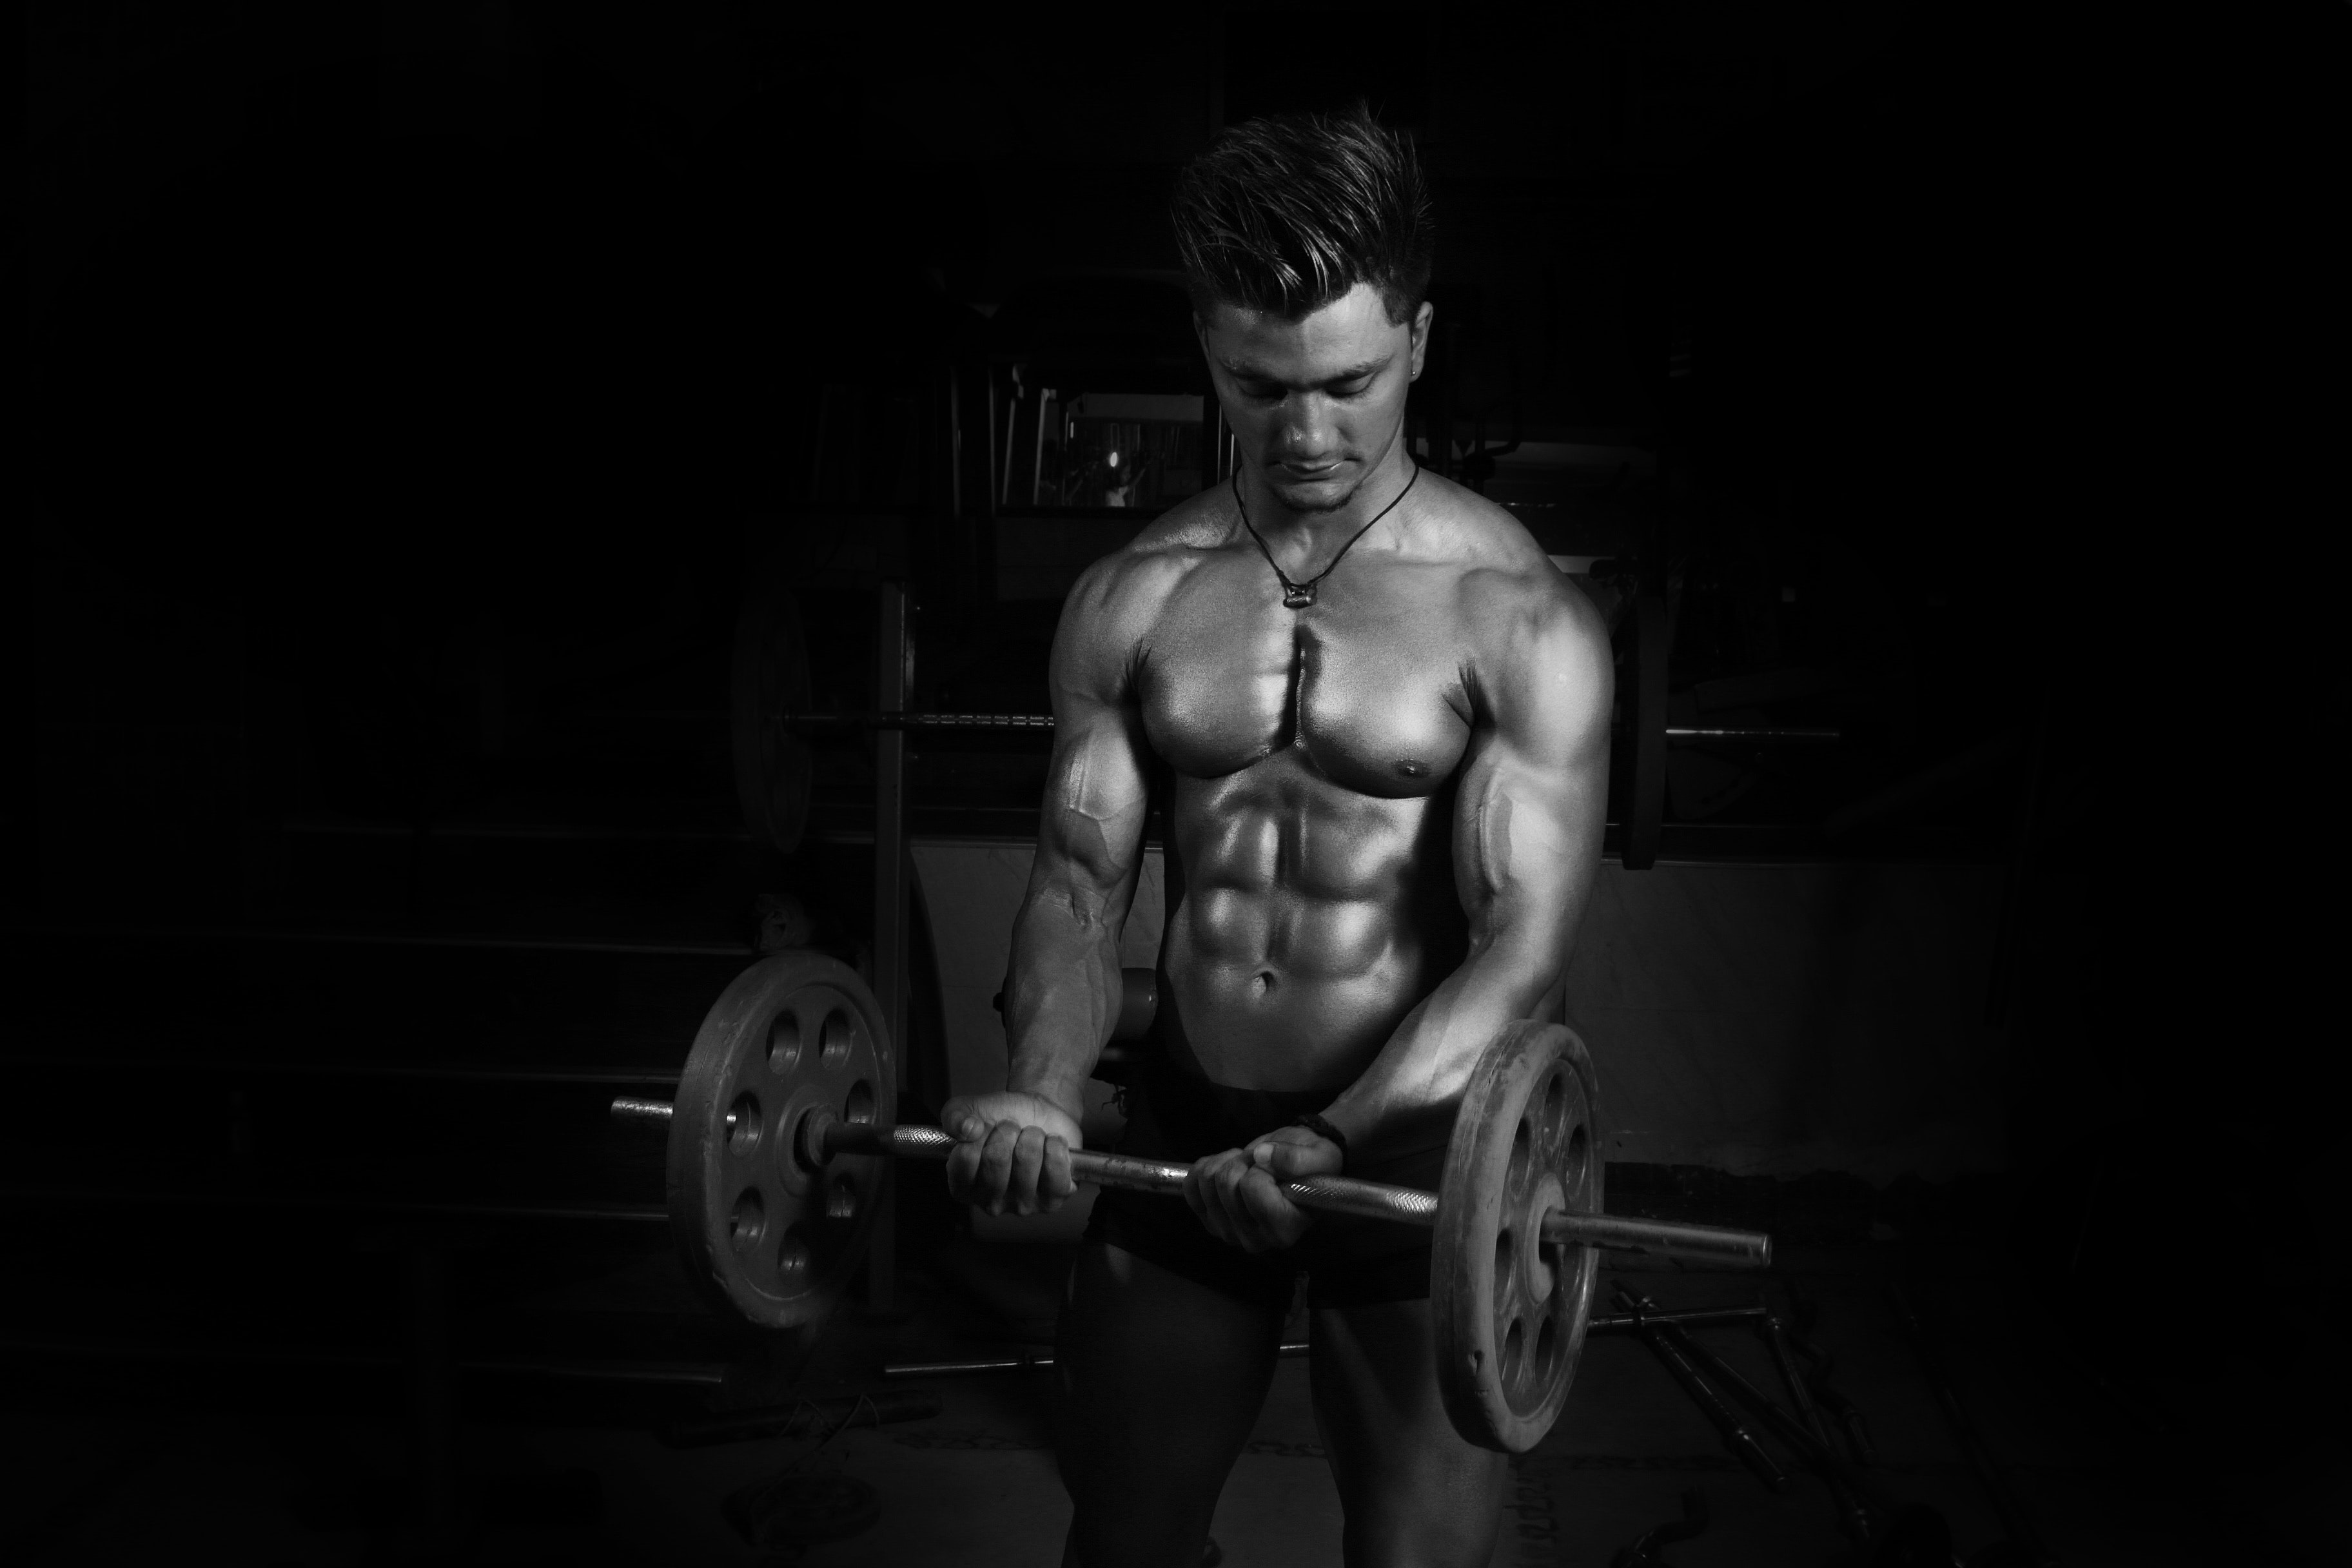 Grayscale Photography of Man Carrying Barbell, Athlete, Weights, Weightlifting, Training, HQ Photo